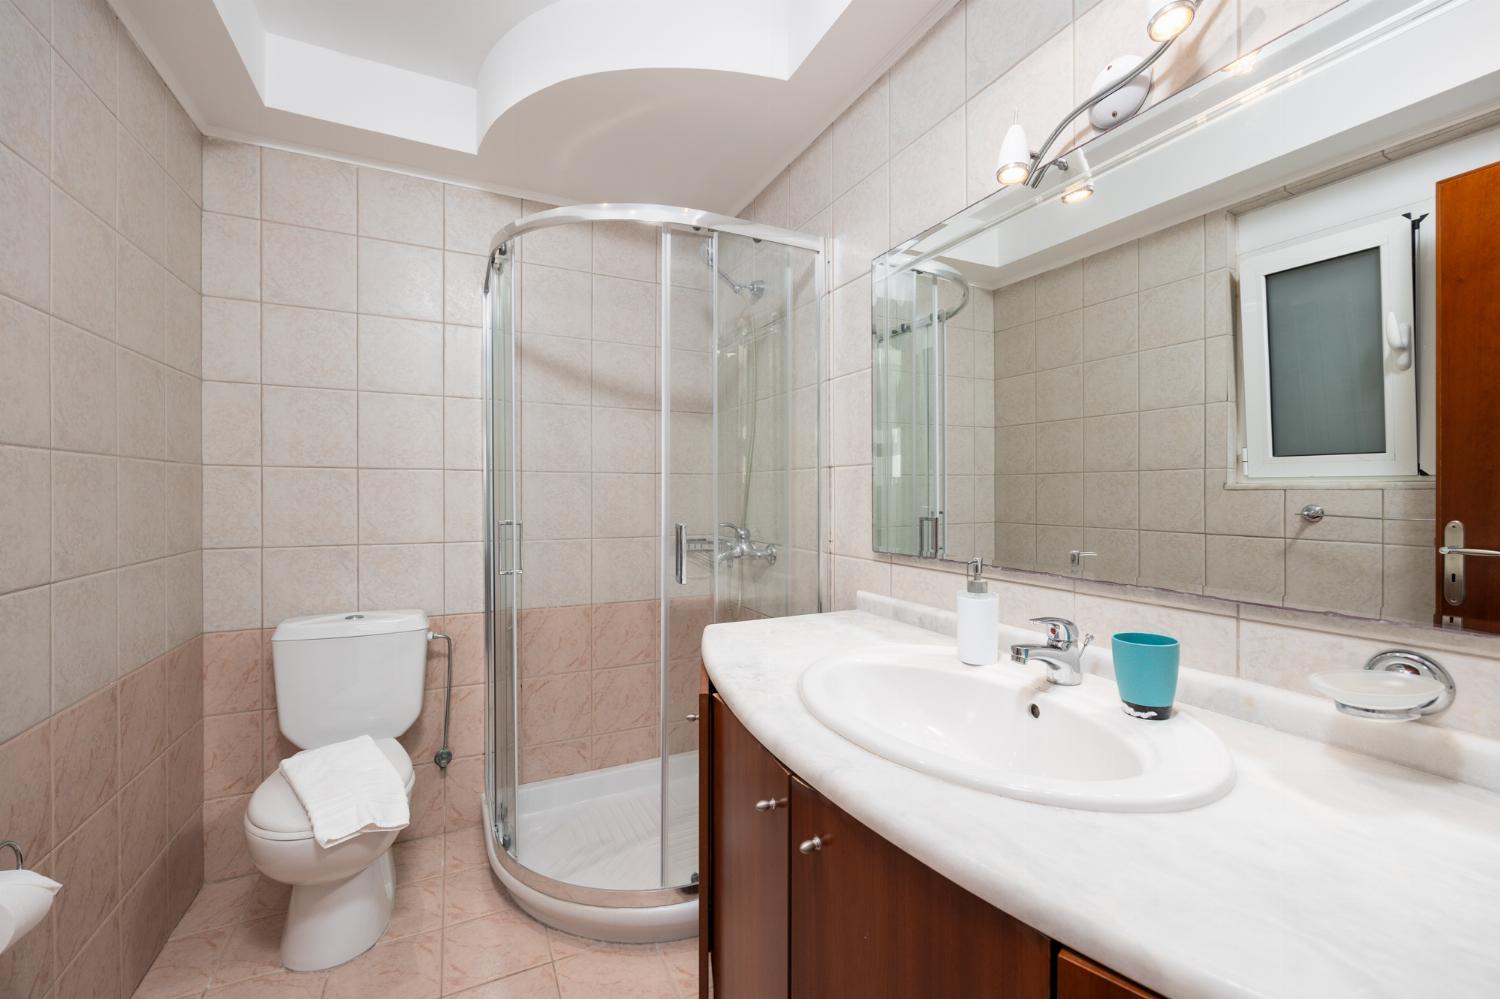 Main building: ensuite bathroom with shower